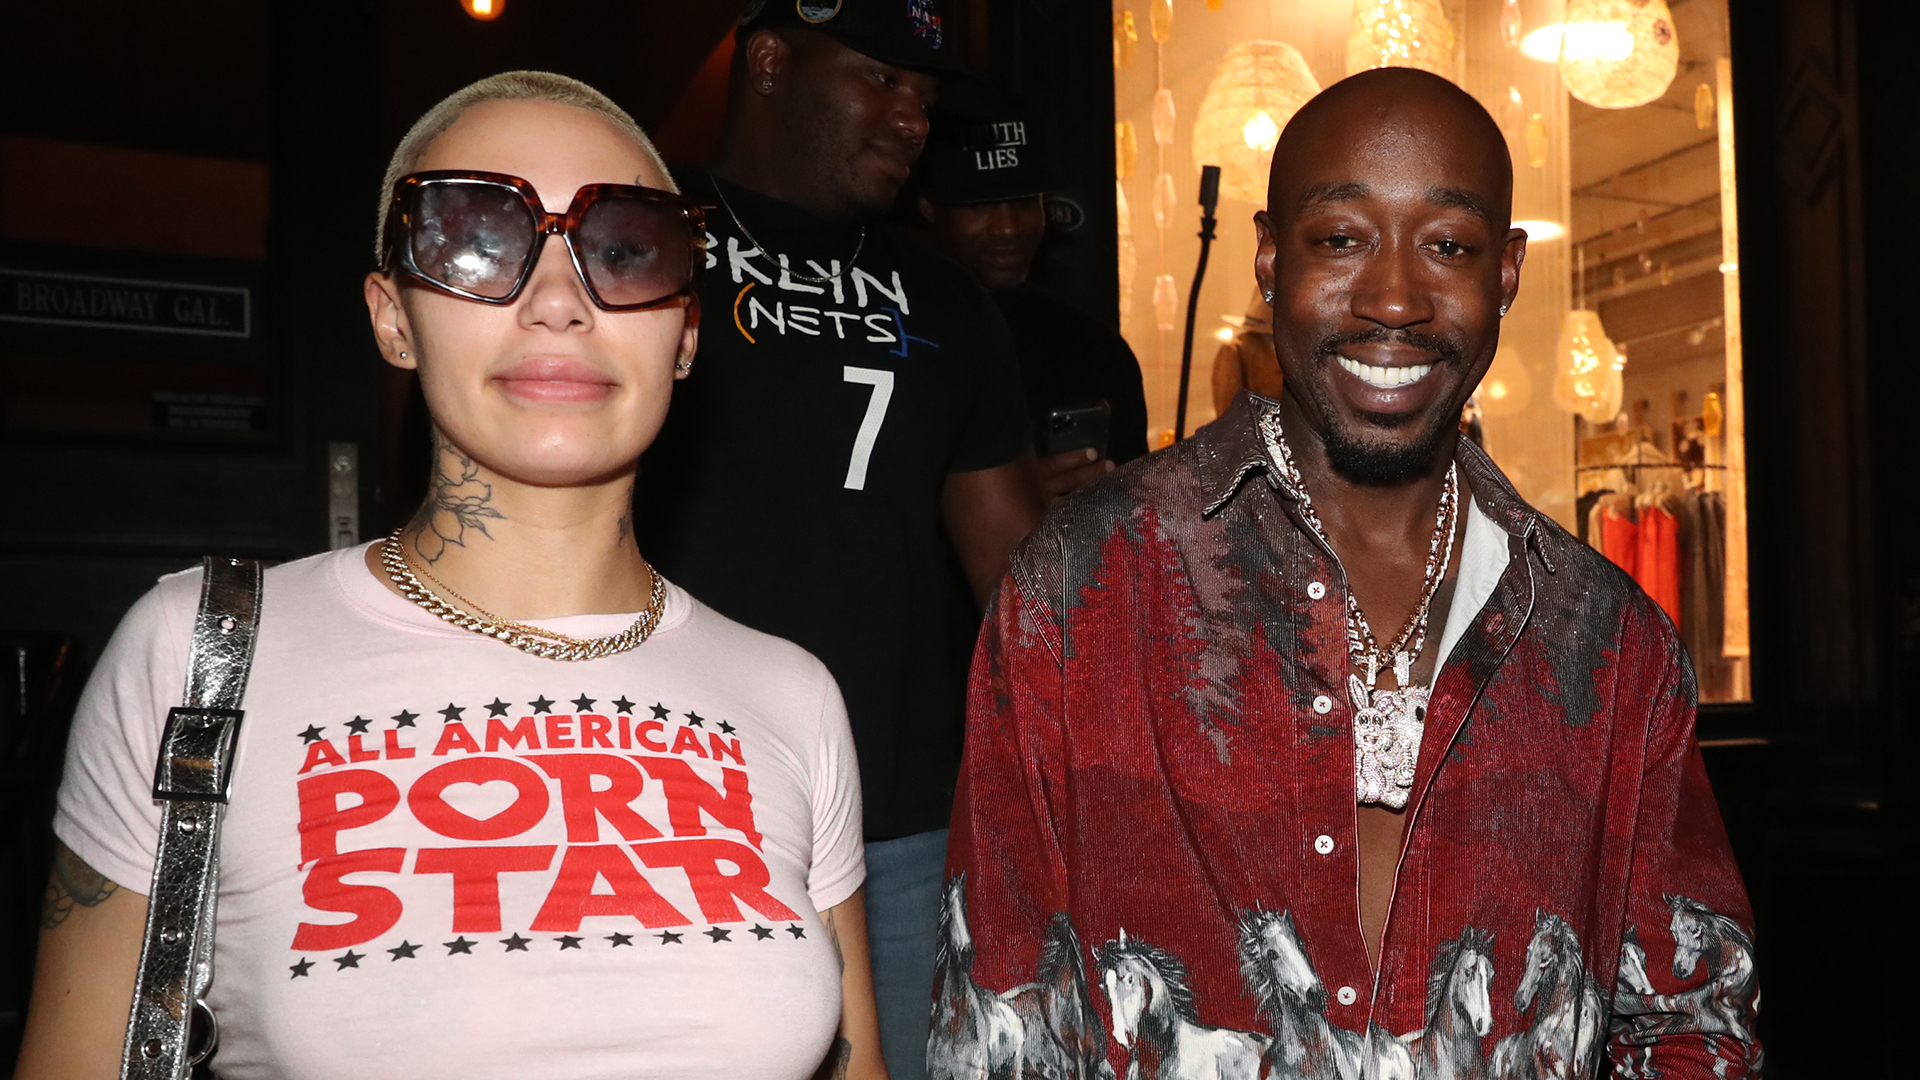 Freddie Gibbs Ex Claims She Stopped Paying His Phone Bill Once He Ghosted Her After Finding Out She Was Pregnant Complex image